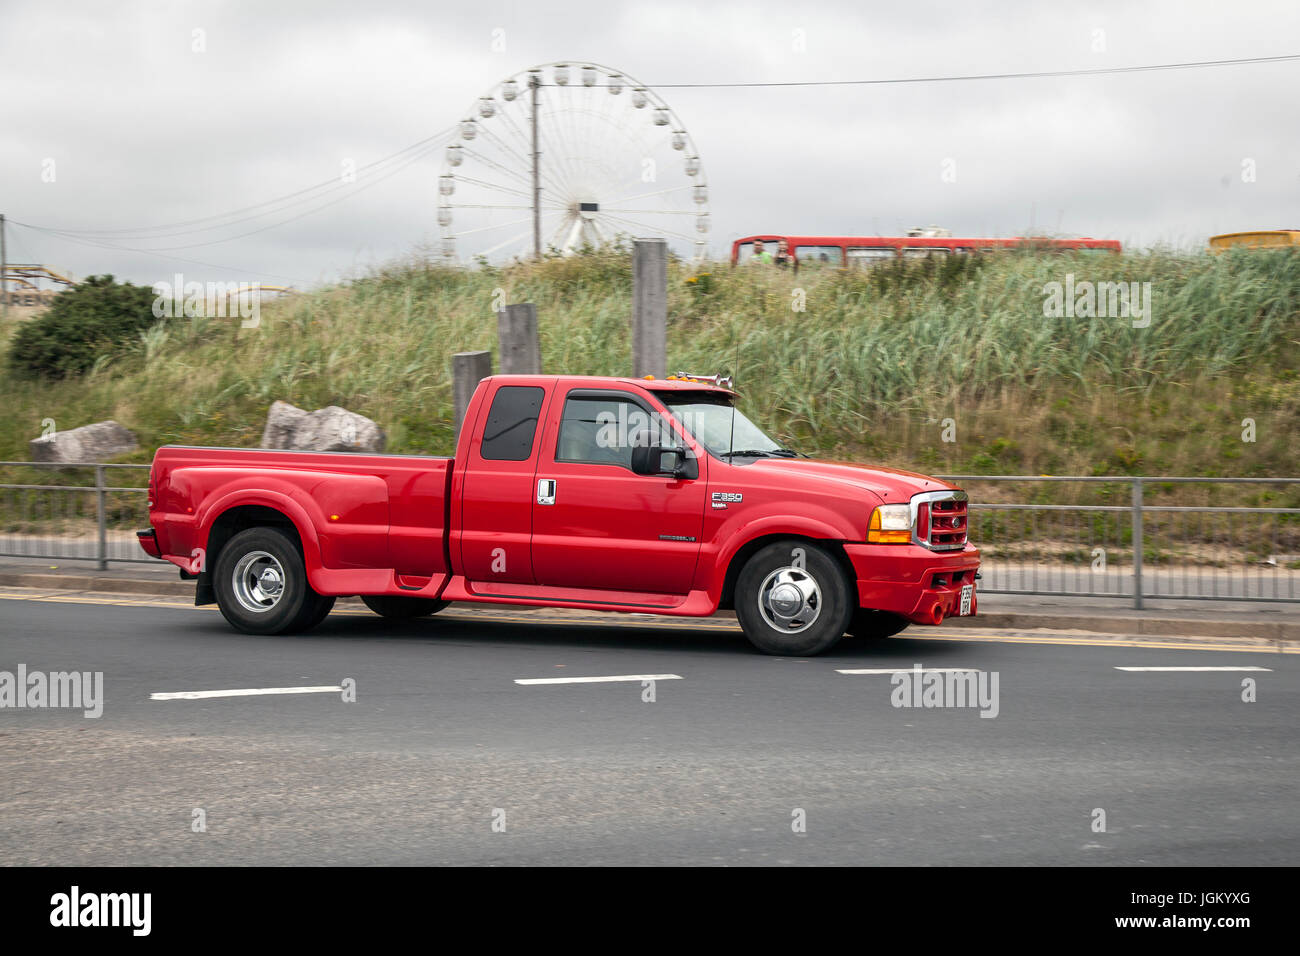 Red Dodge Ram SUV double cab pick-up.   Souped-up supercars from across the North West once again descend on Southport for a high-octane meet-up. Stock Photo